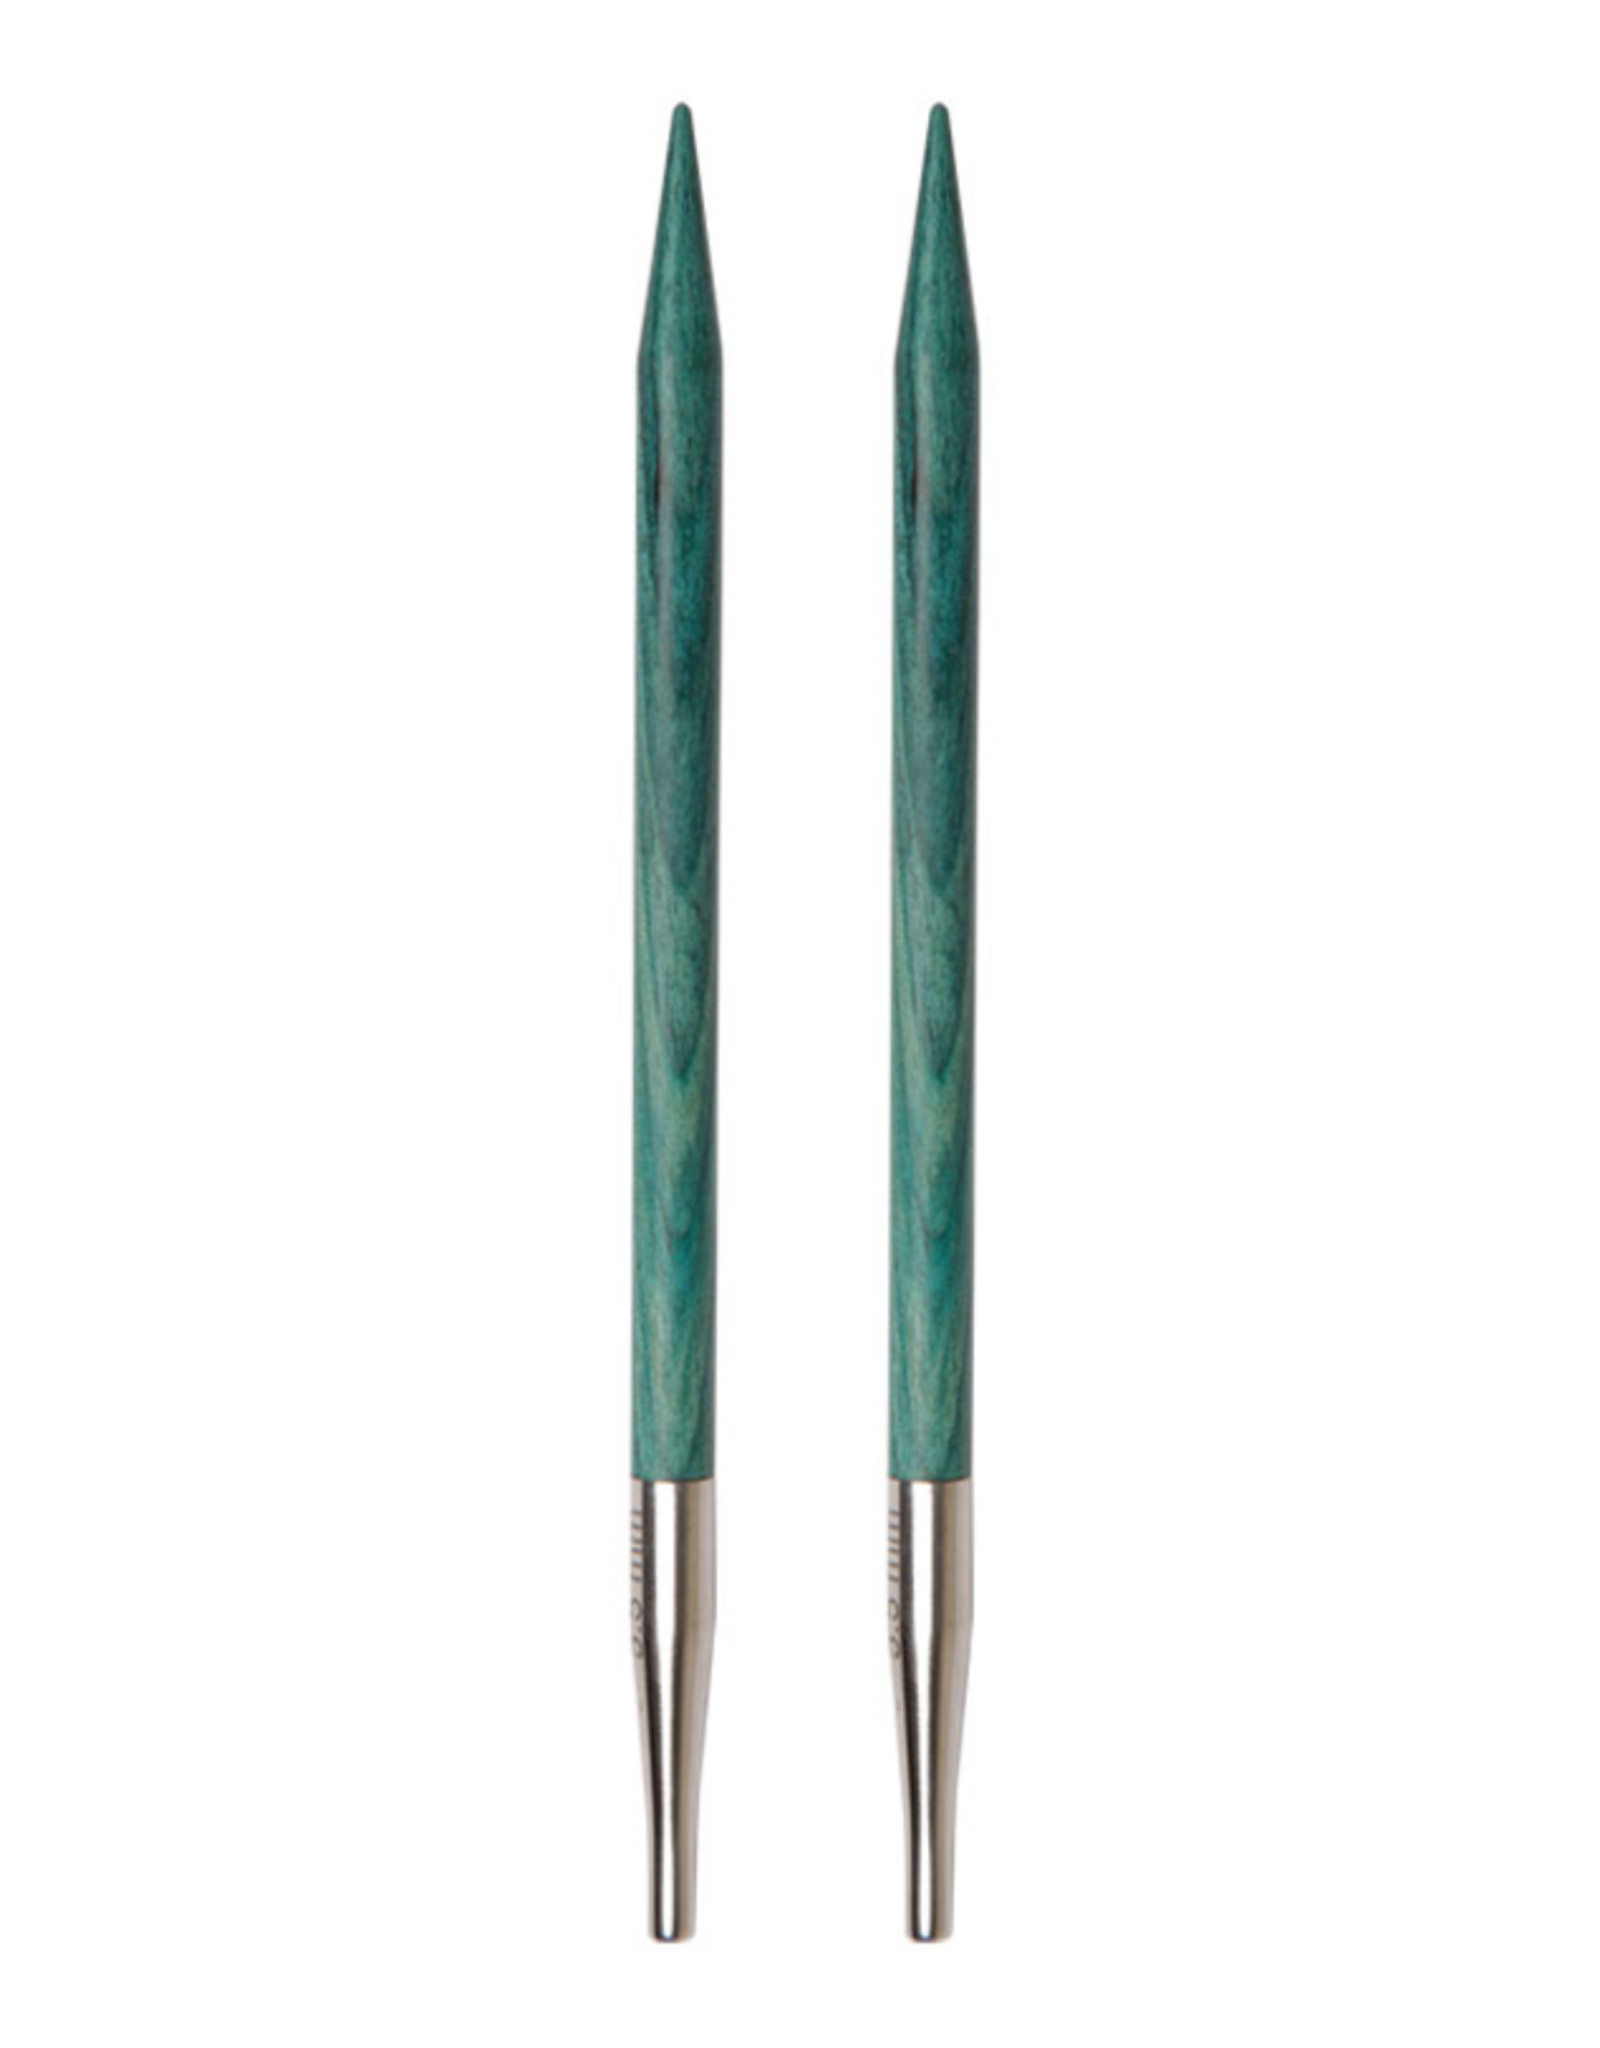 Dreamz size US 4 interchangeable needle tips for 24" cords and up.